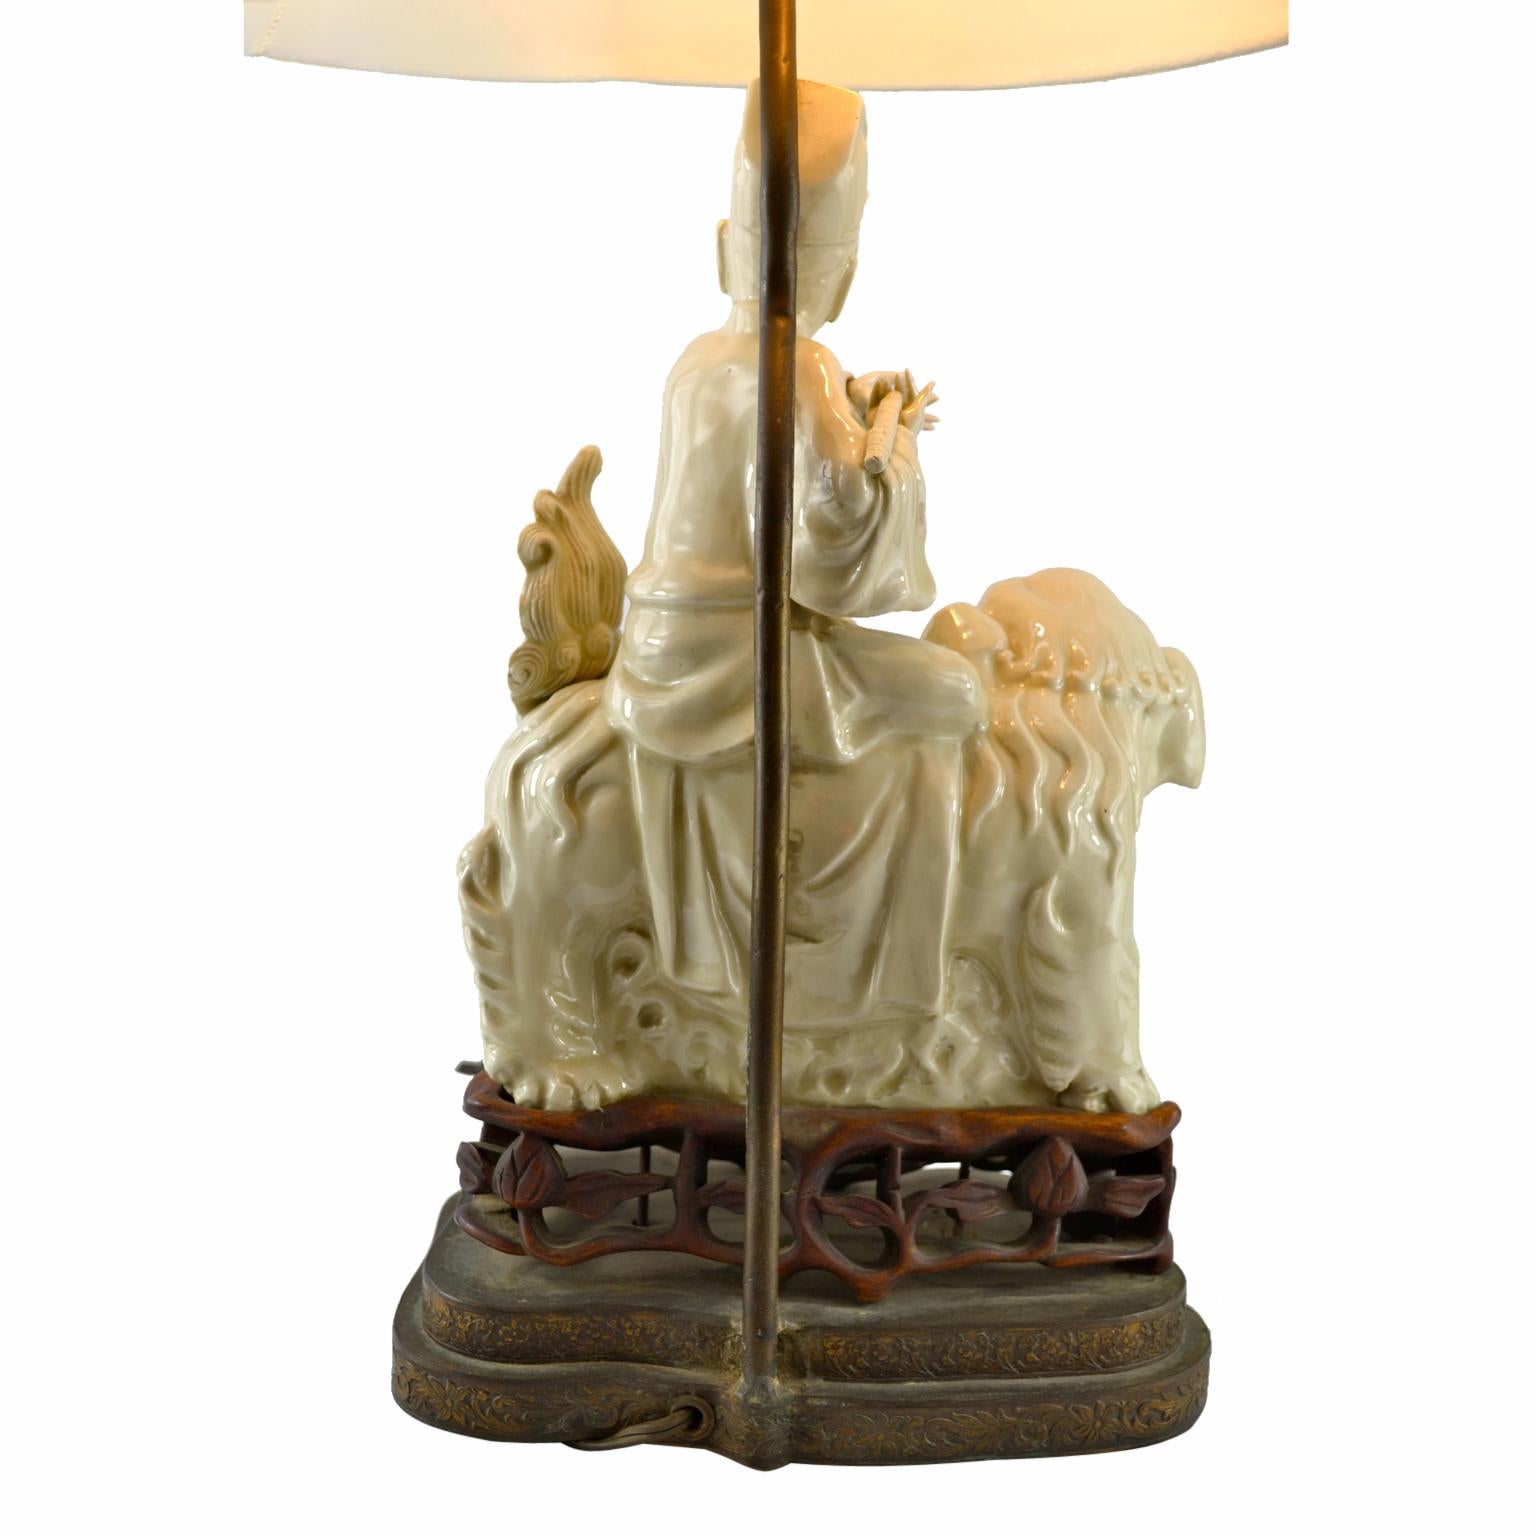 A Blanc de Chine lamp featuring a Chinese god sits astride a growling foo dog, the whole mounted on a carved rosewood base on a further gilt metal base.